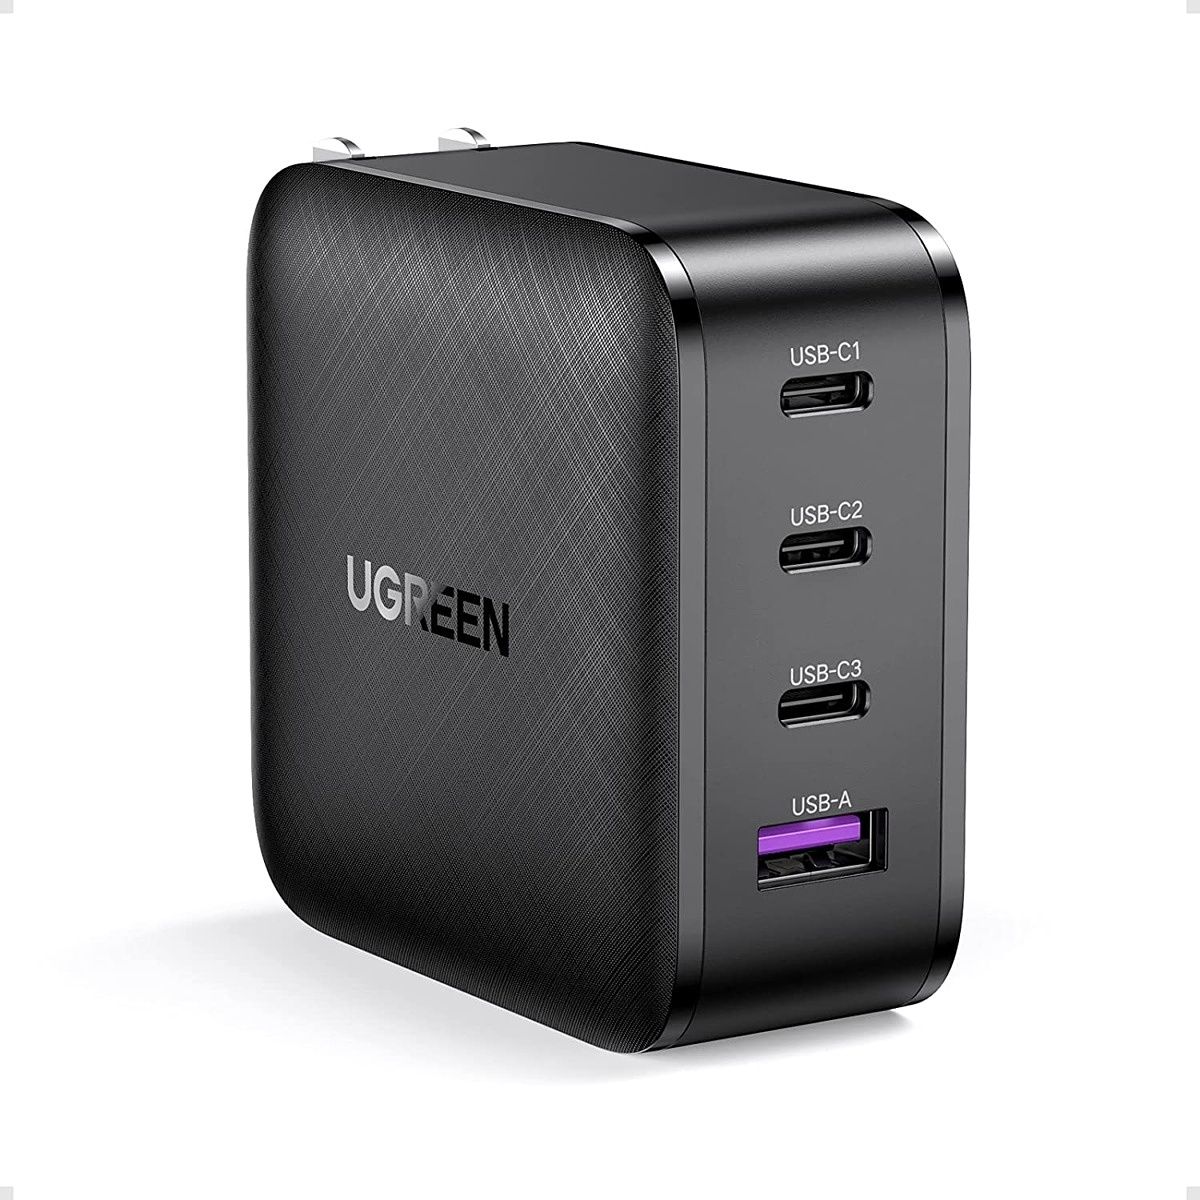 The Ugreen fast charger packs four USB ports that you can use to charge multiple devices simultaneously. There are three Type-C ports and one Type-A, of which the top two Type-C ports can deliver up to 65W of power when only one port is being used. In addition, the charger supports USB PPS.